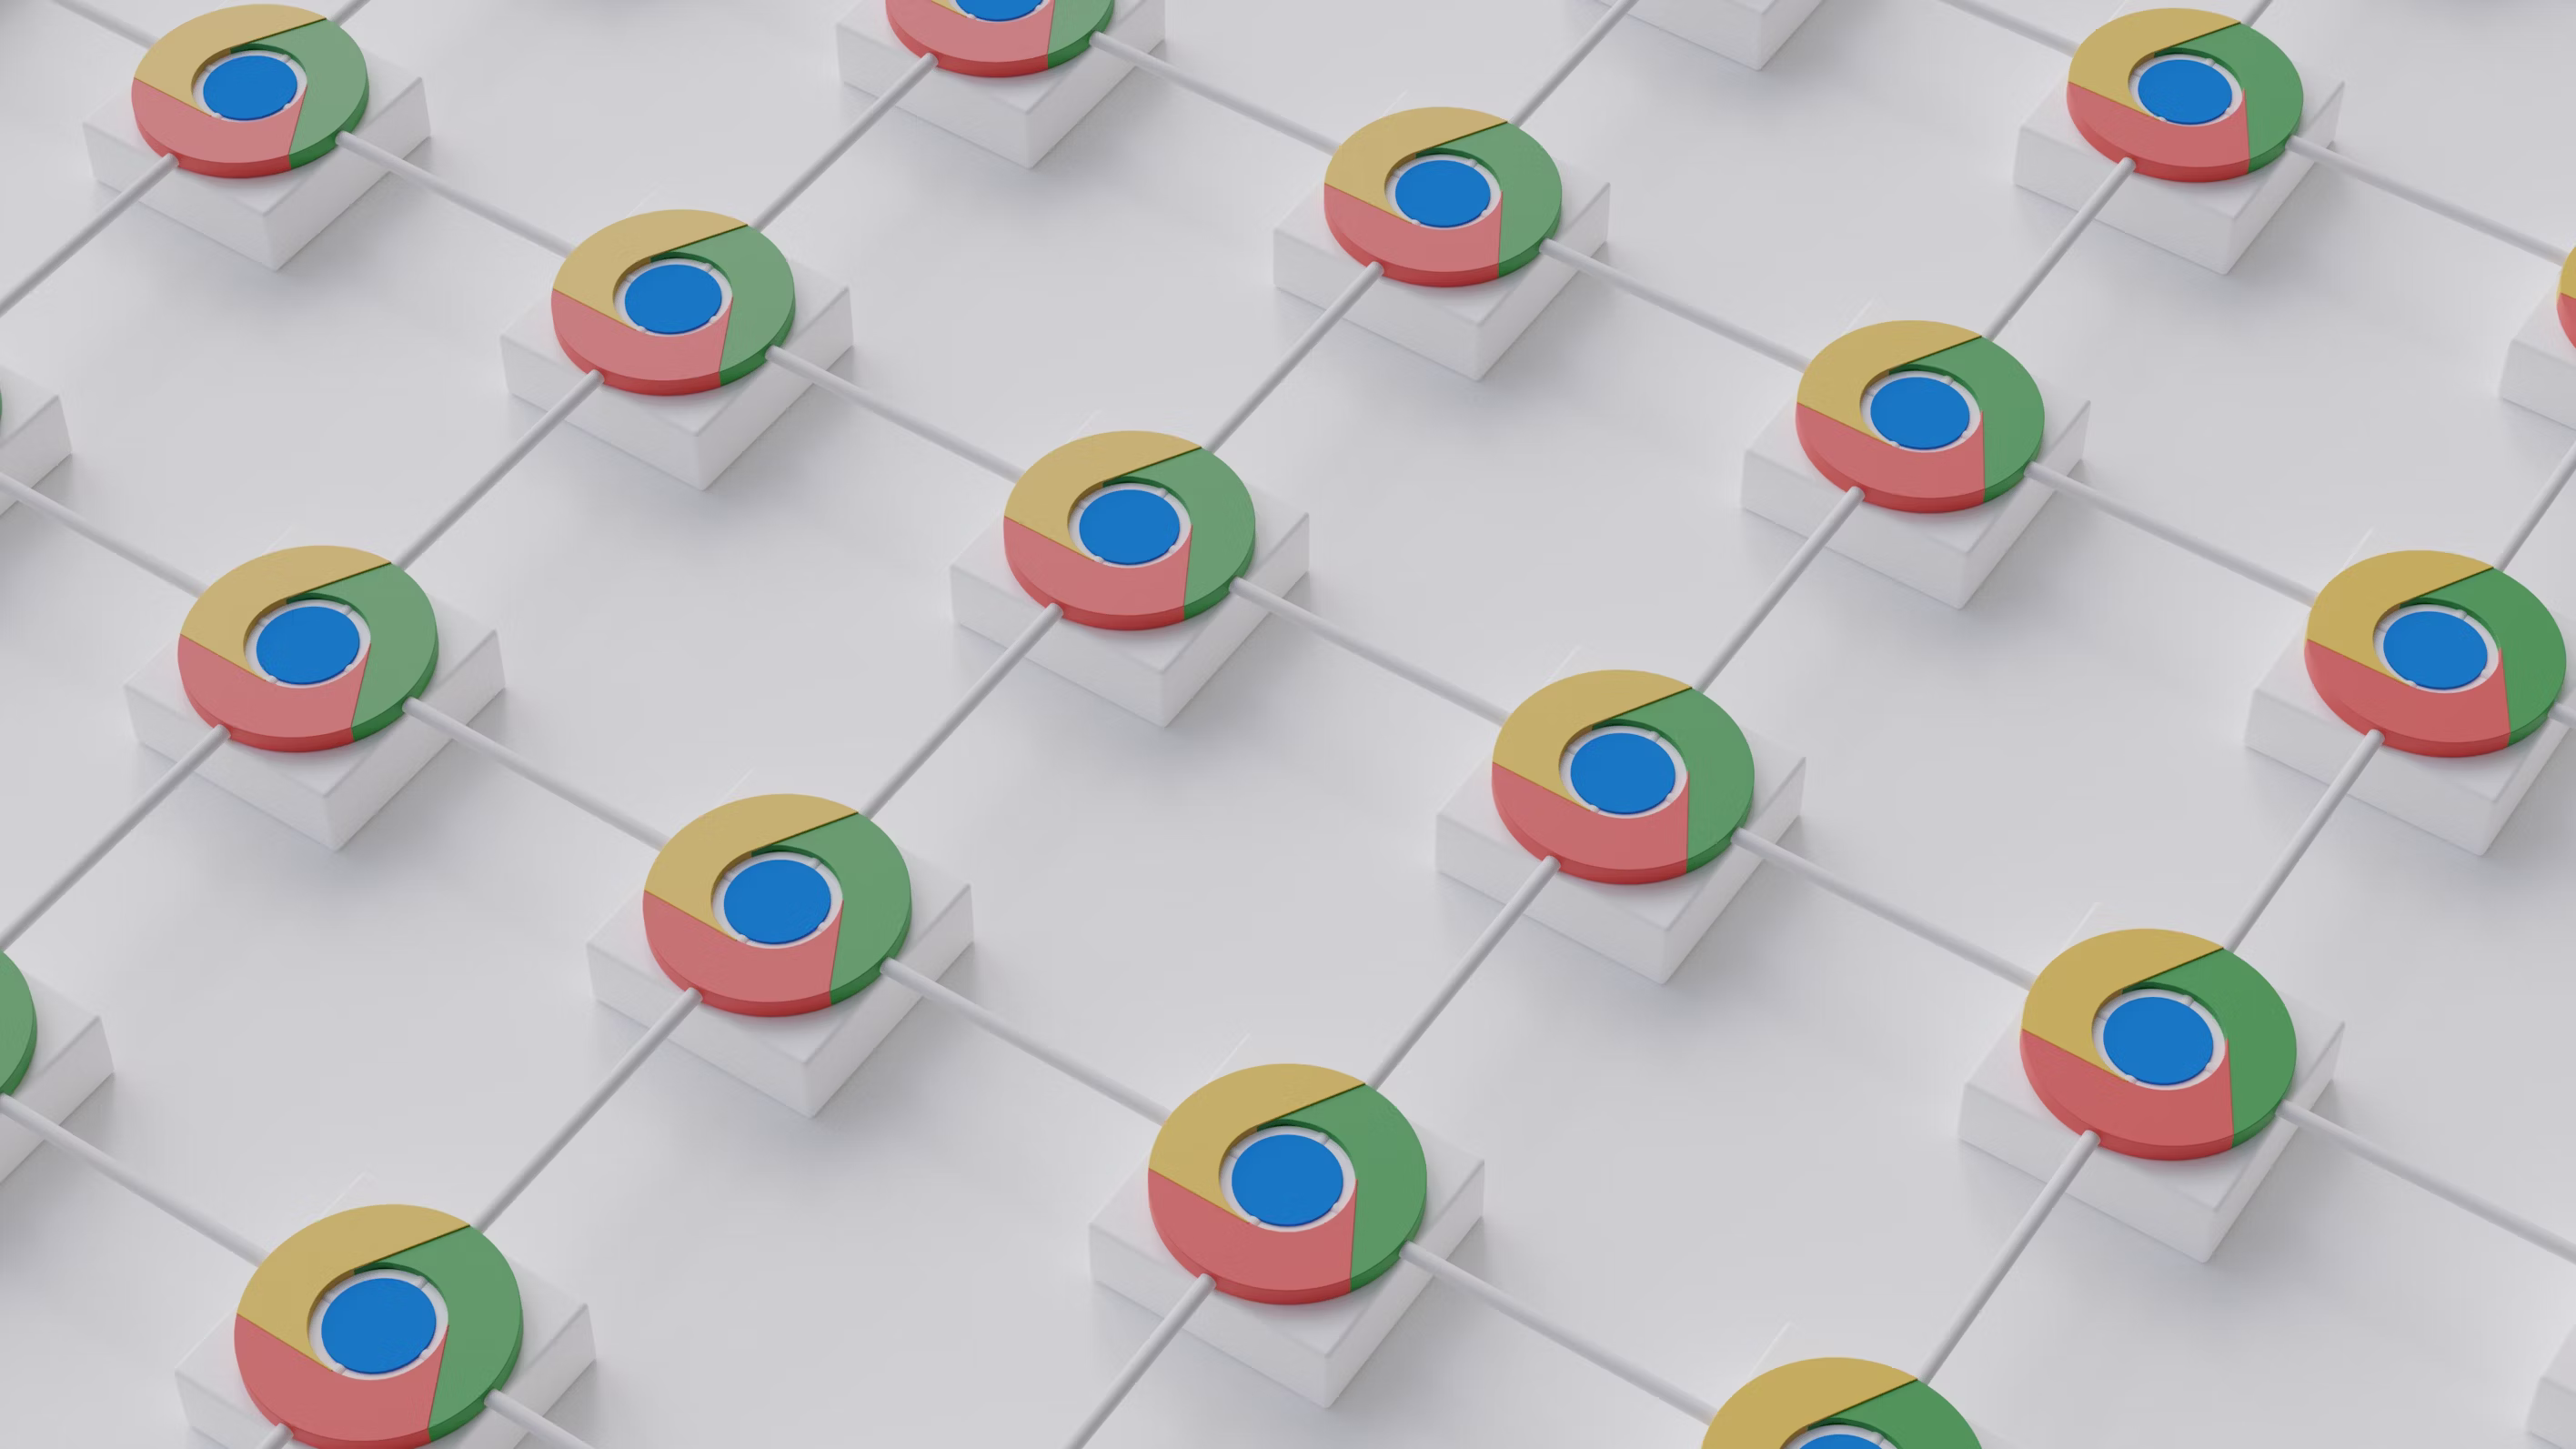 How to block or allow URLs with Chrome